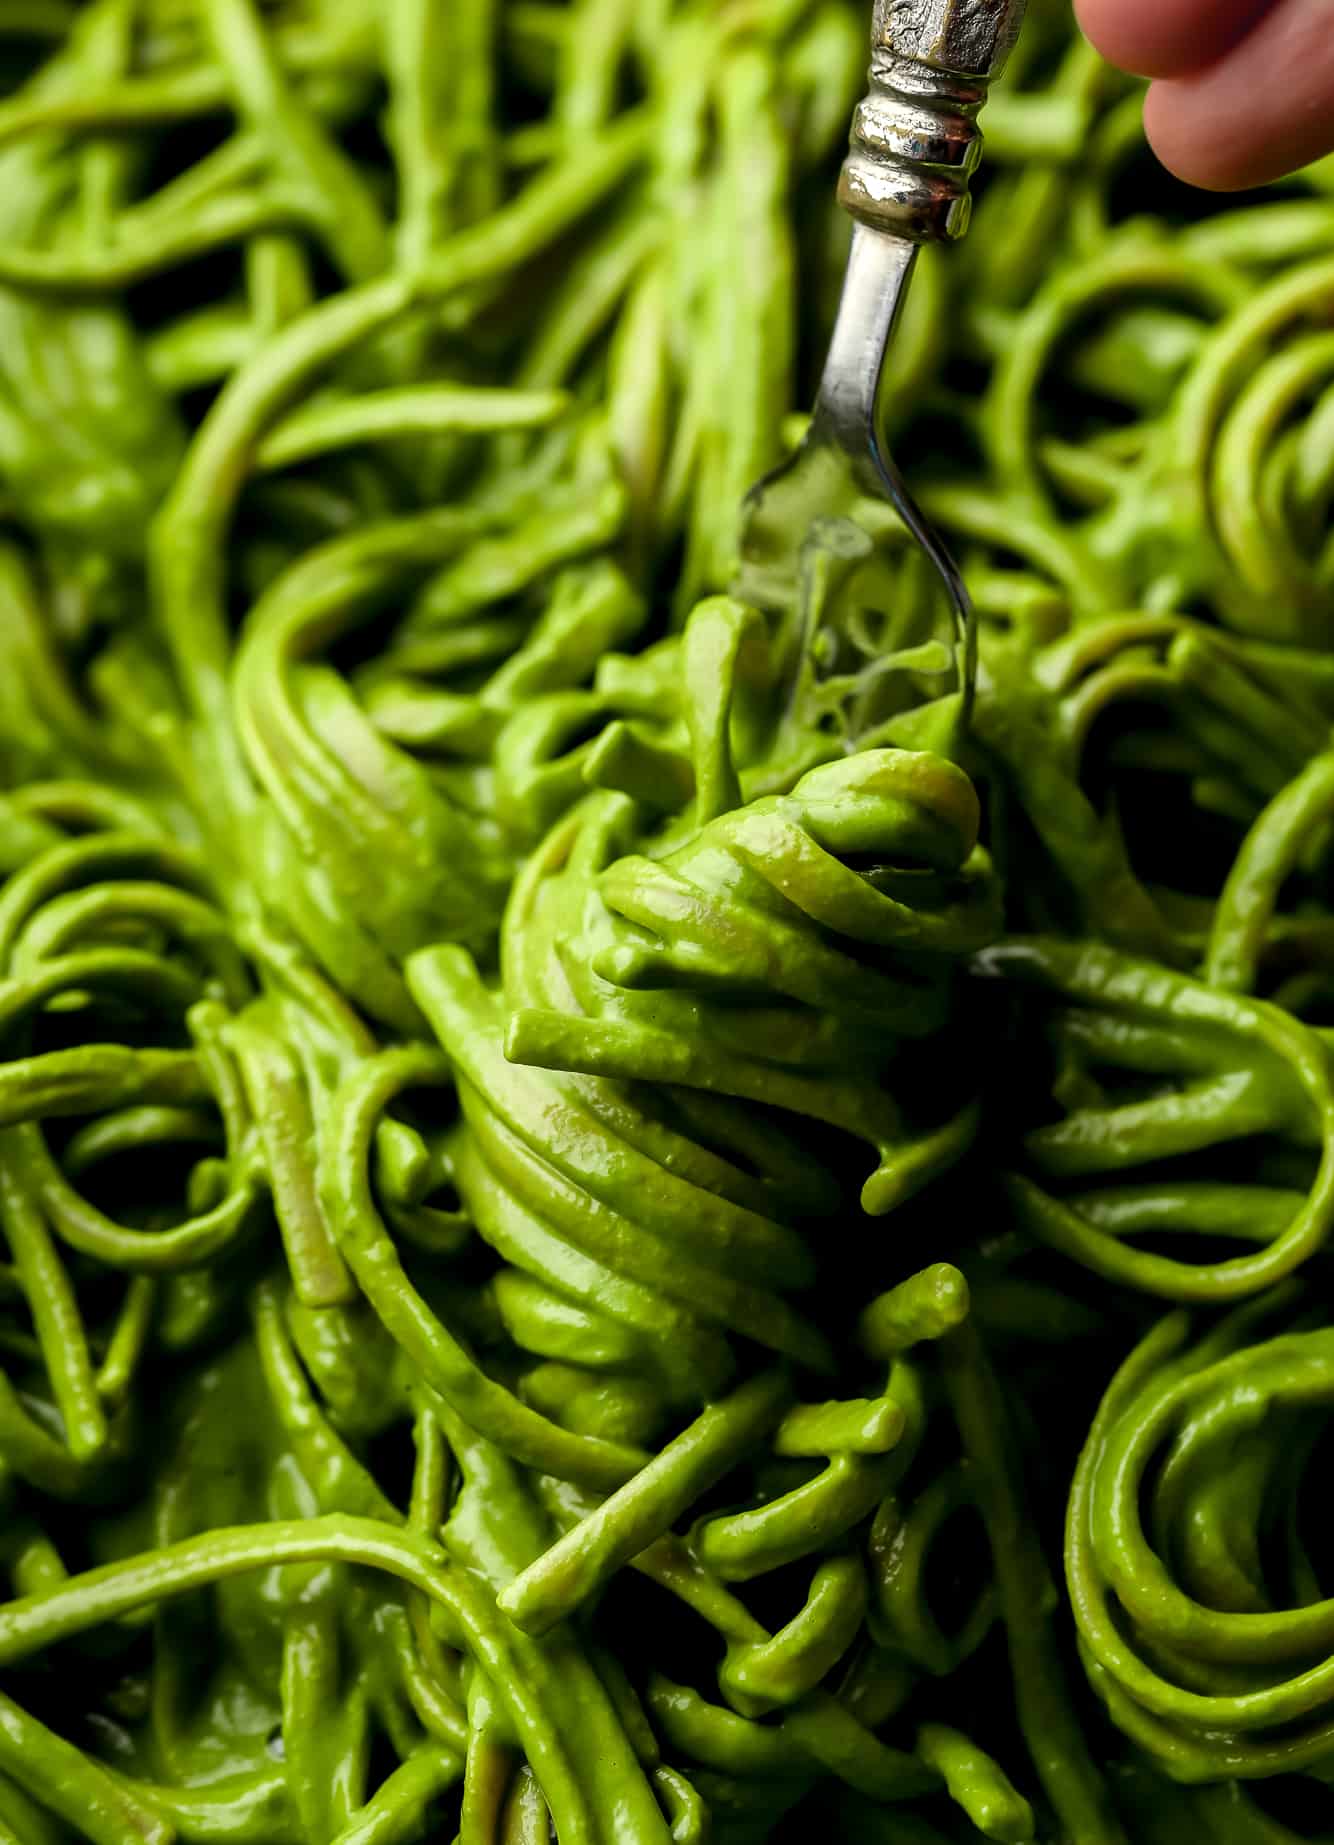 using a fork to twirl a bite of green pasta.